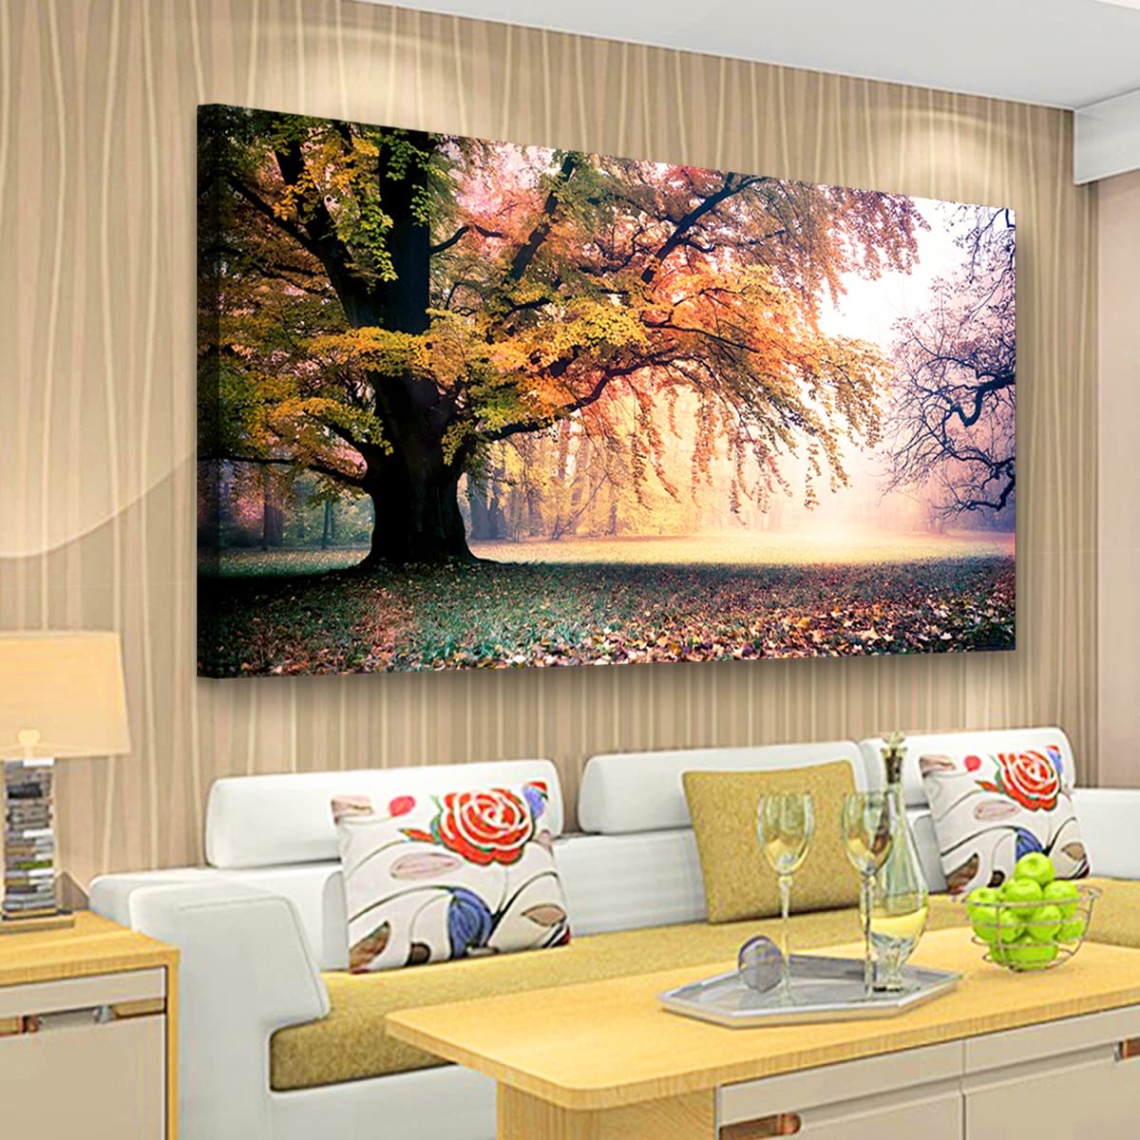 home decor art Niche Utama Home Tree of Life Wall Art Canvas Prints Natural Scenery Picture Home Decor  Colorful Forest Paintings for Living Room Bathroom Bedroom Kitchen  Decorations